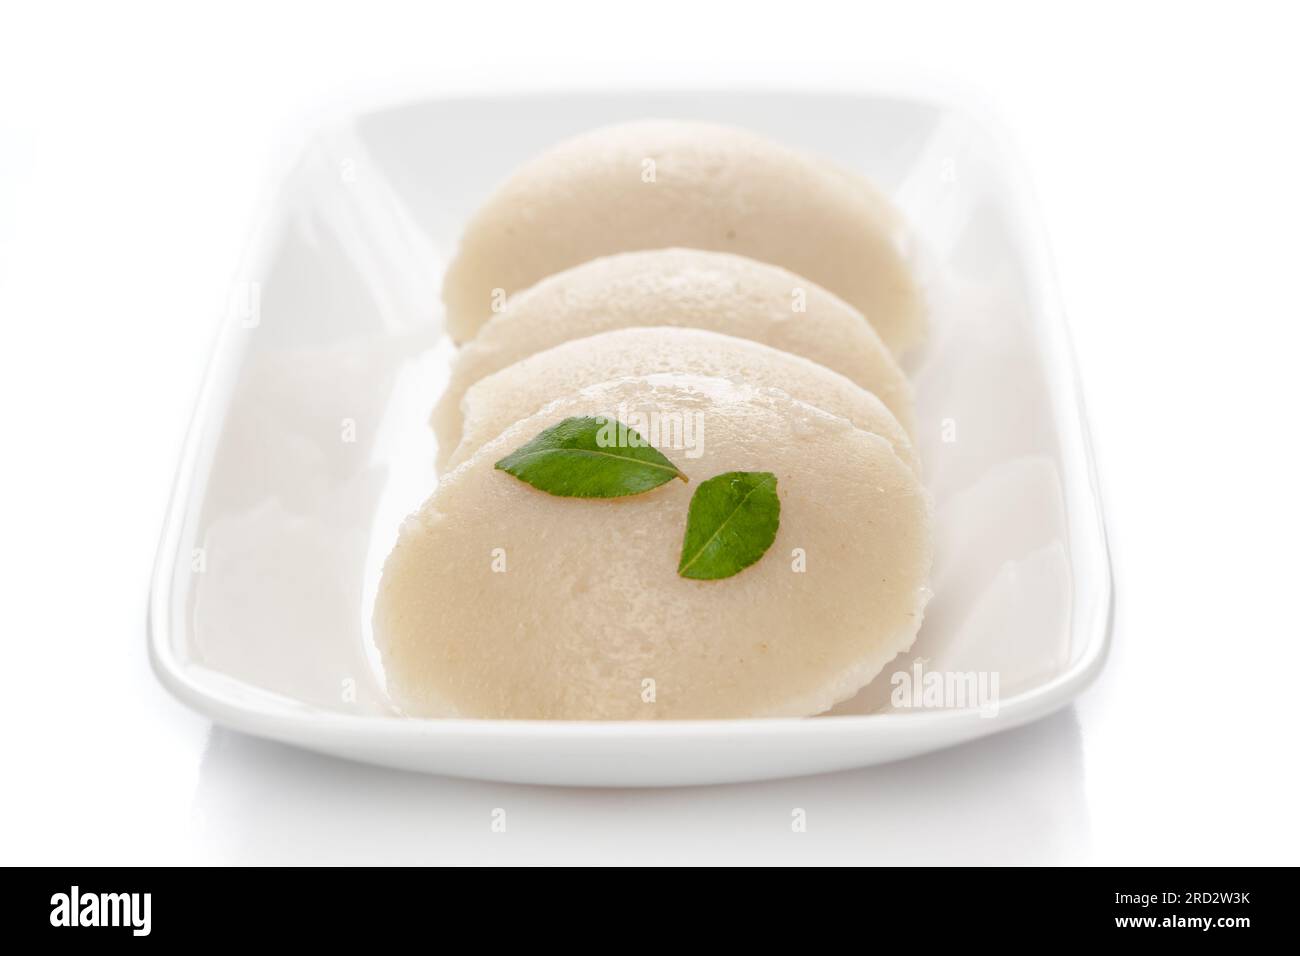 Close-up of fresh rava Idli or Idly with green curry leav is a popular south Indian food, served with coconut chutney. selective focus Stock Photo